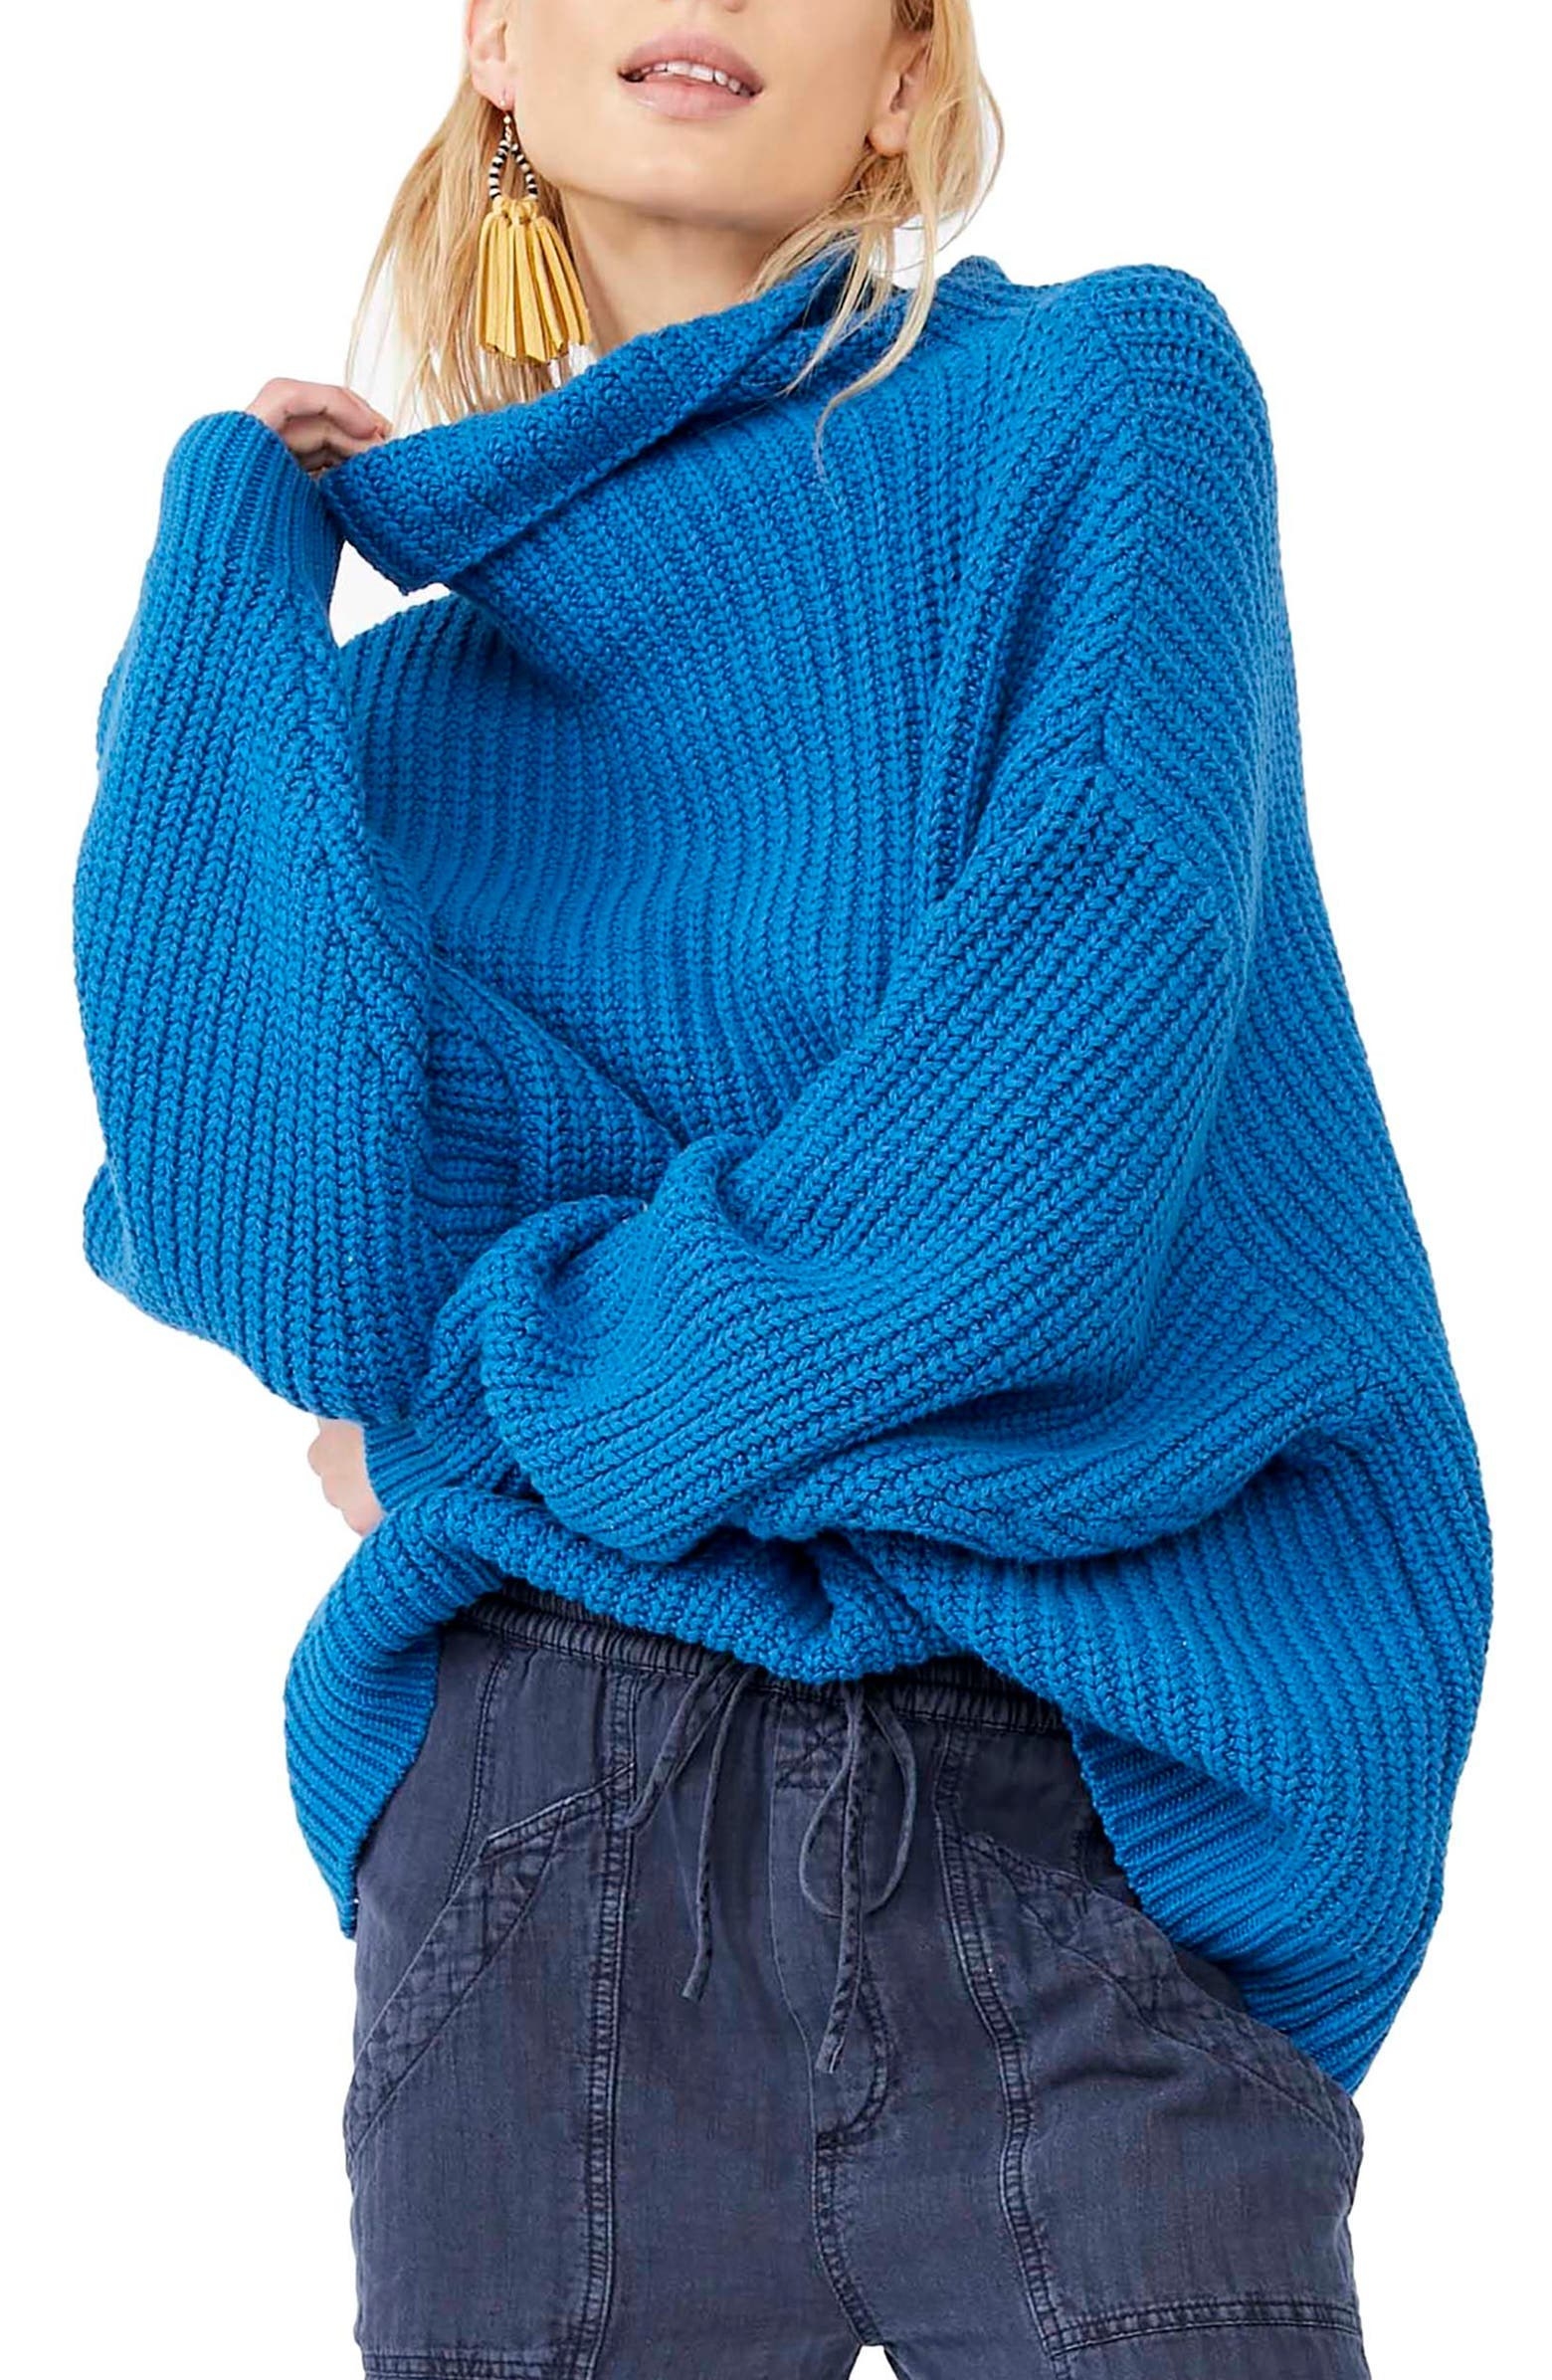 Model wearing bright blue sweater with long sleeves and rolled over turtleneck